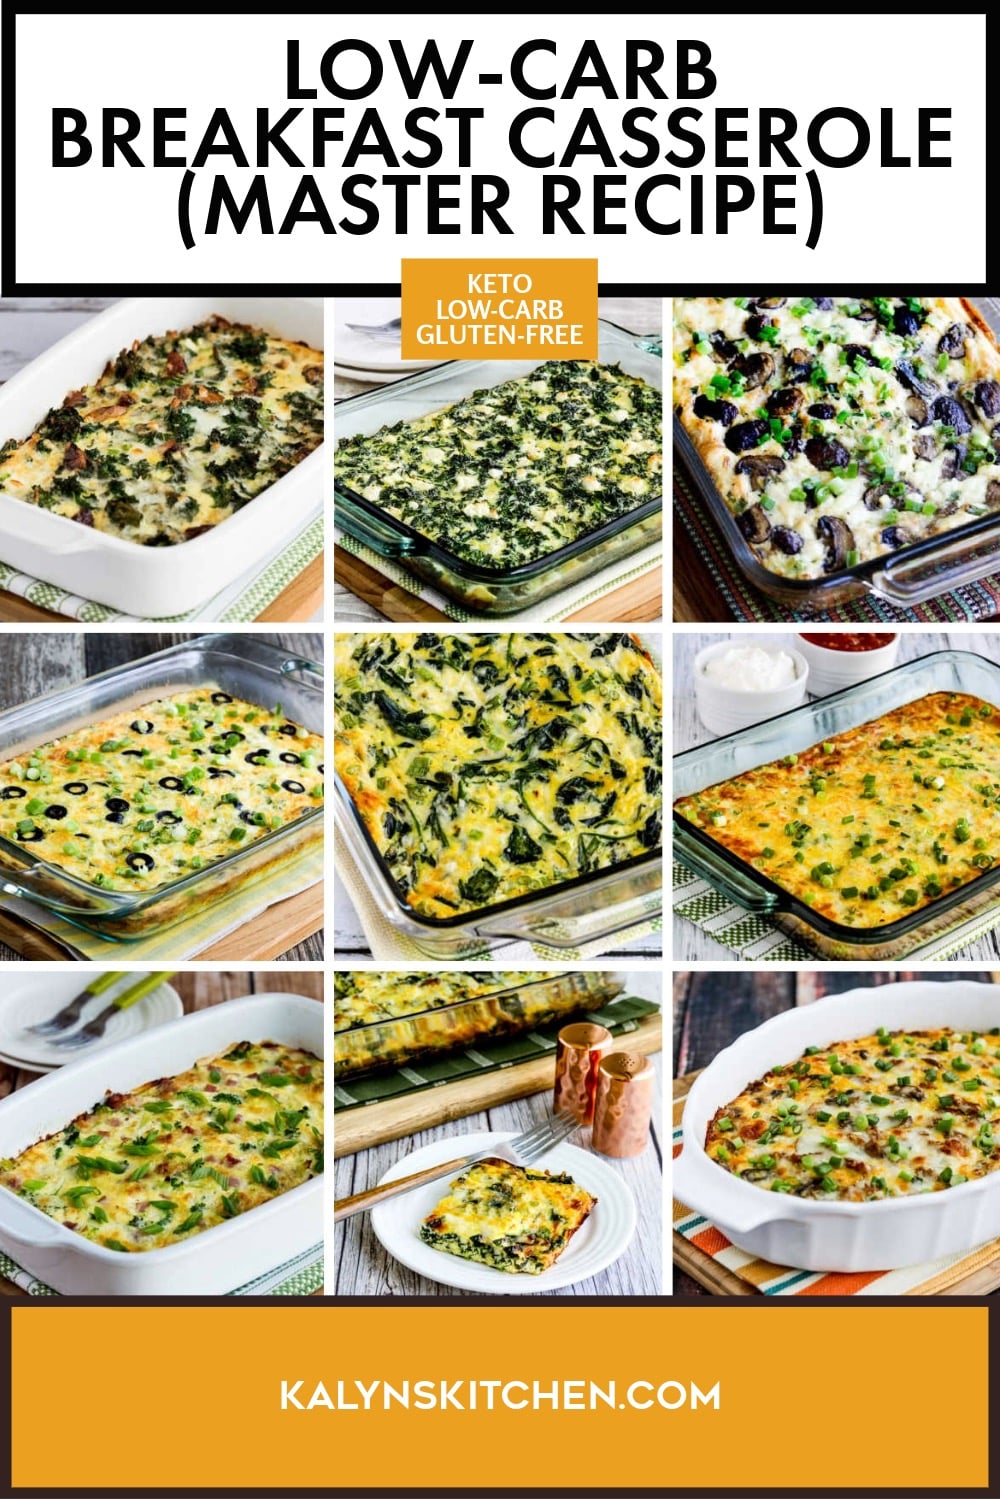 Pinterest image of Low-Carb Breakfast Casserole (Master Recipe)